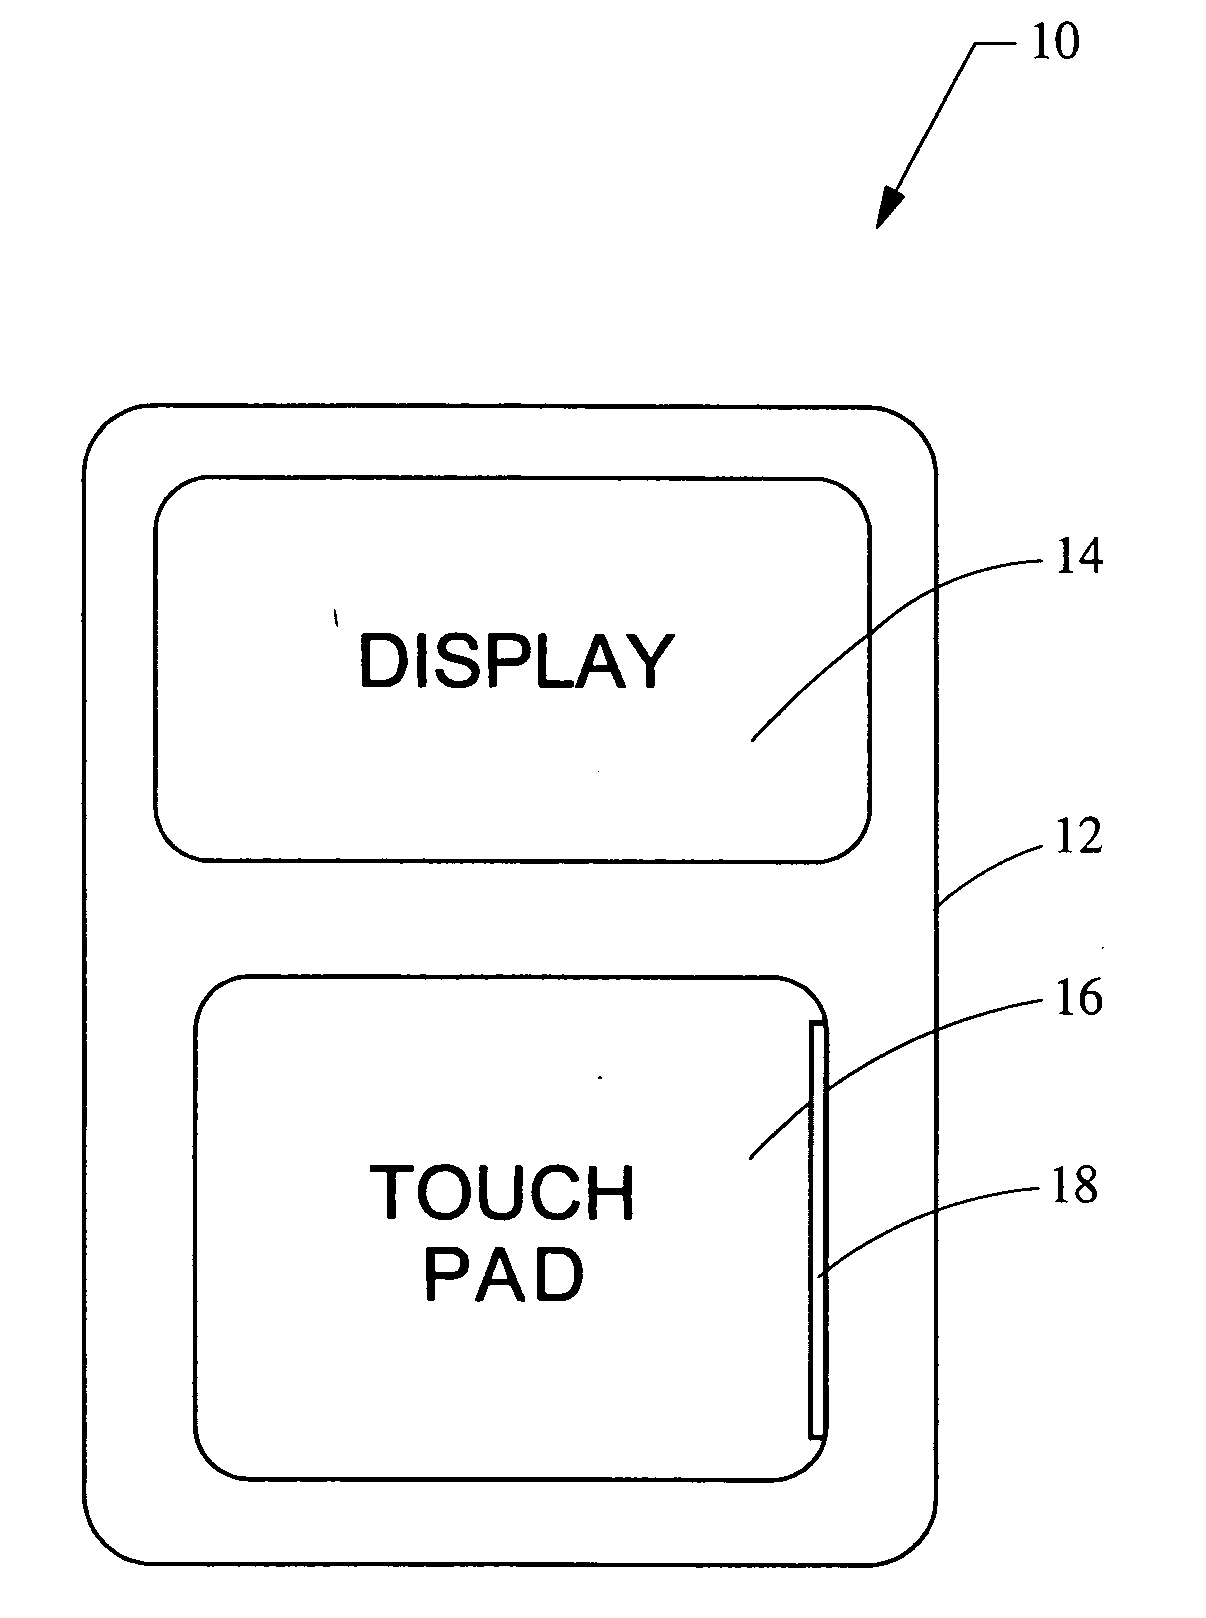 Radio system with touch pad interface